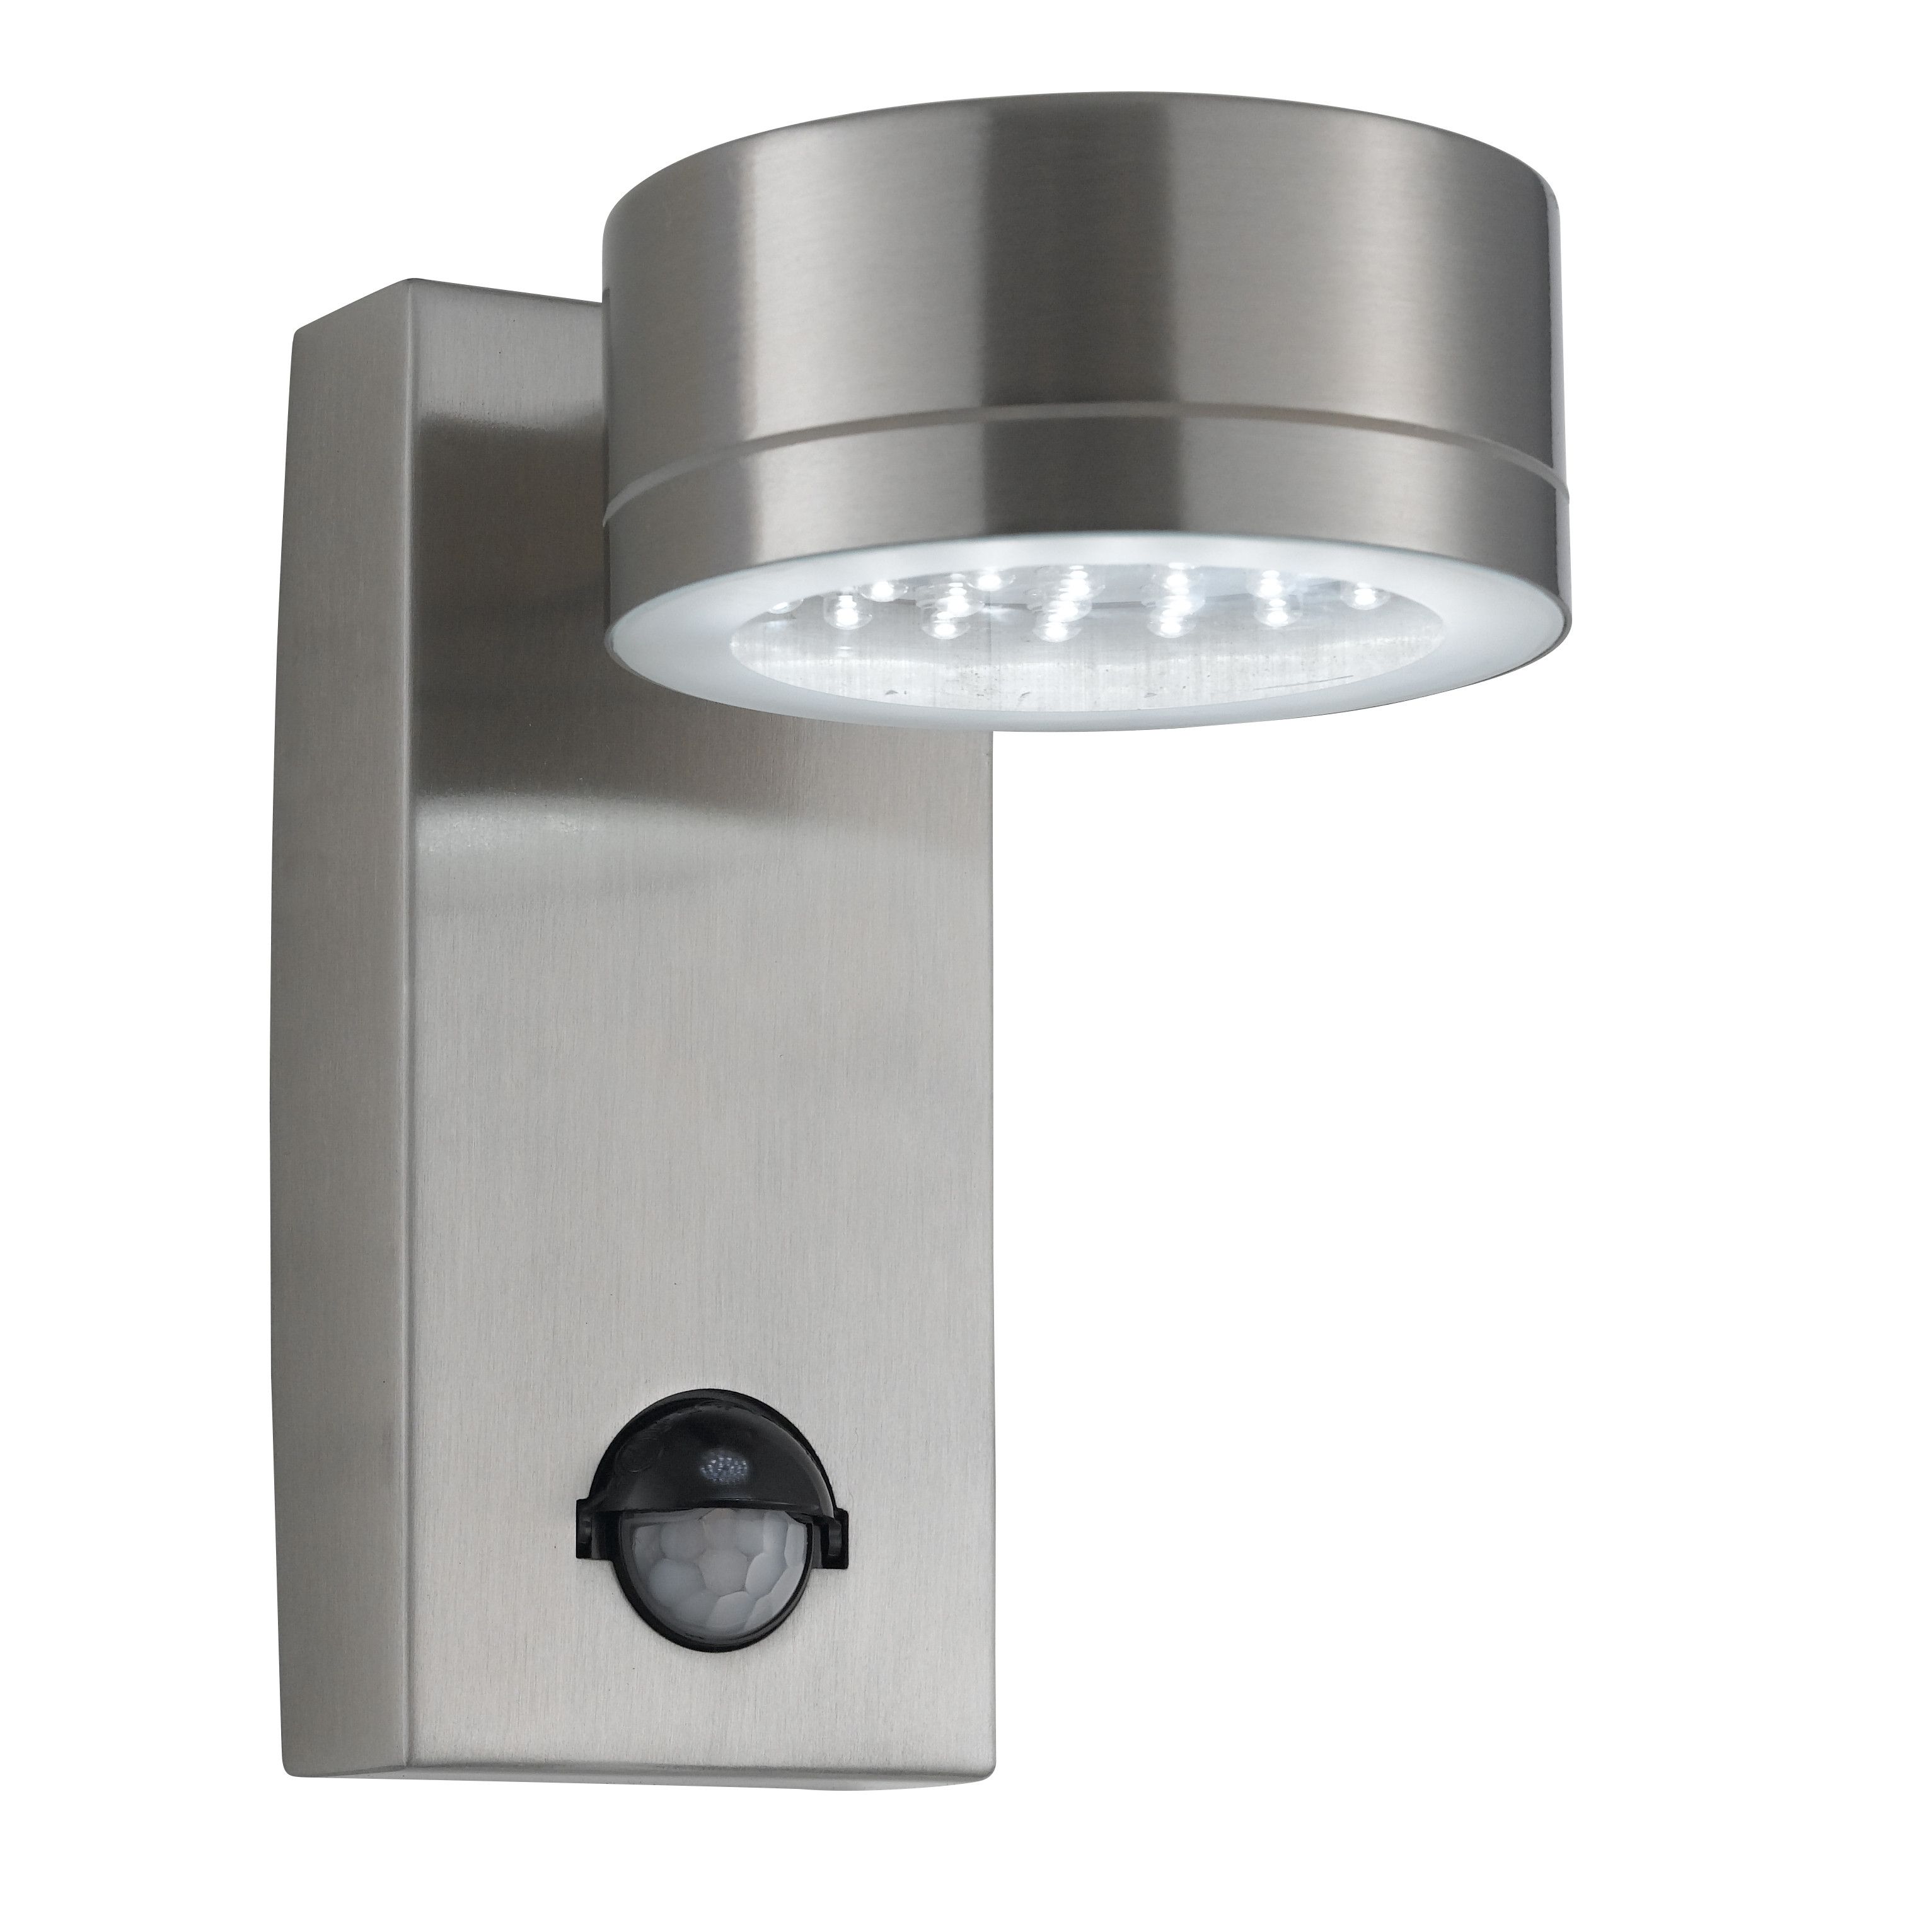 Steel Ip44 36 Led Outdoor Wall Light With Motion Sensor In Outdoor Wall Lighting With Motion Sensor (View 11 of 15)